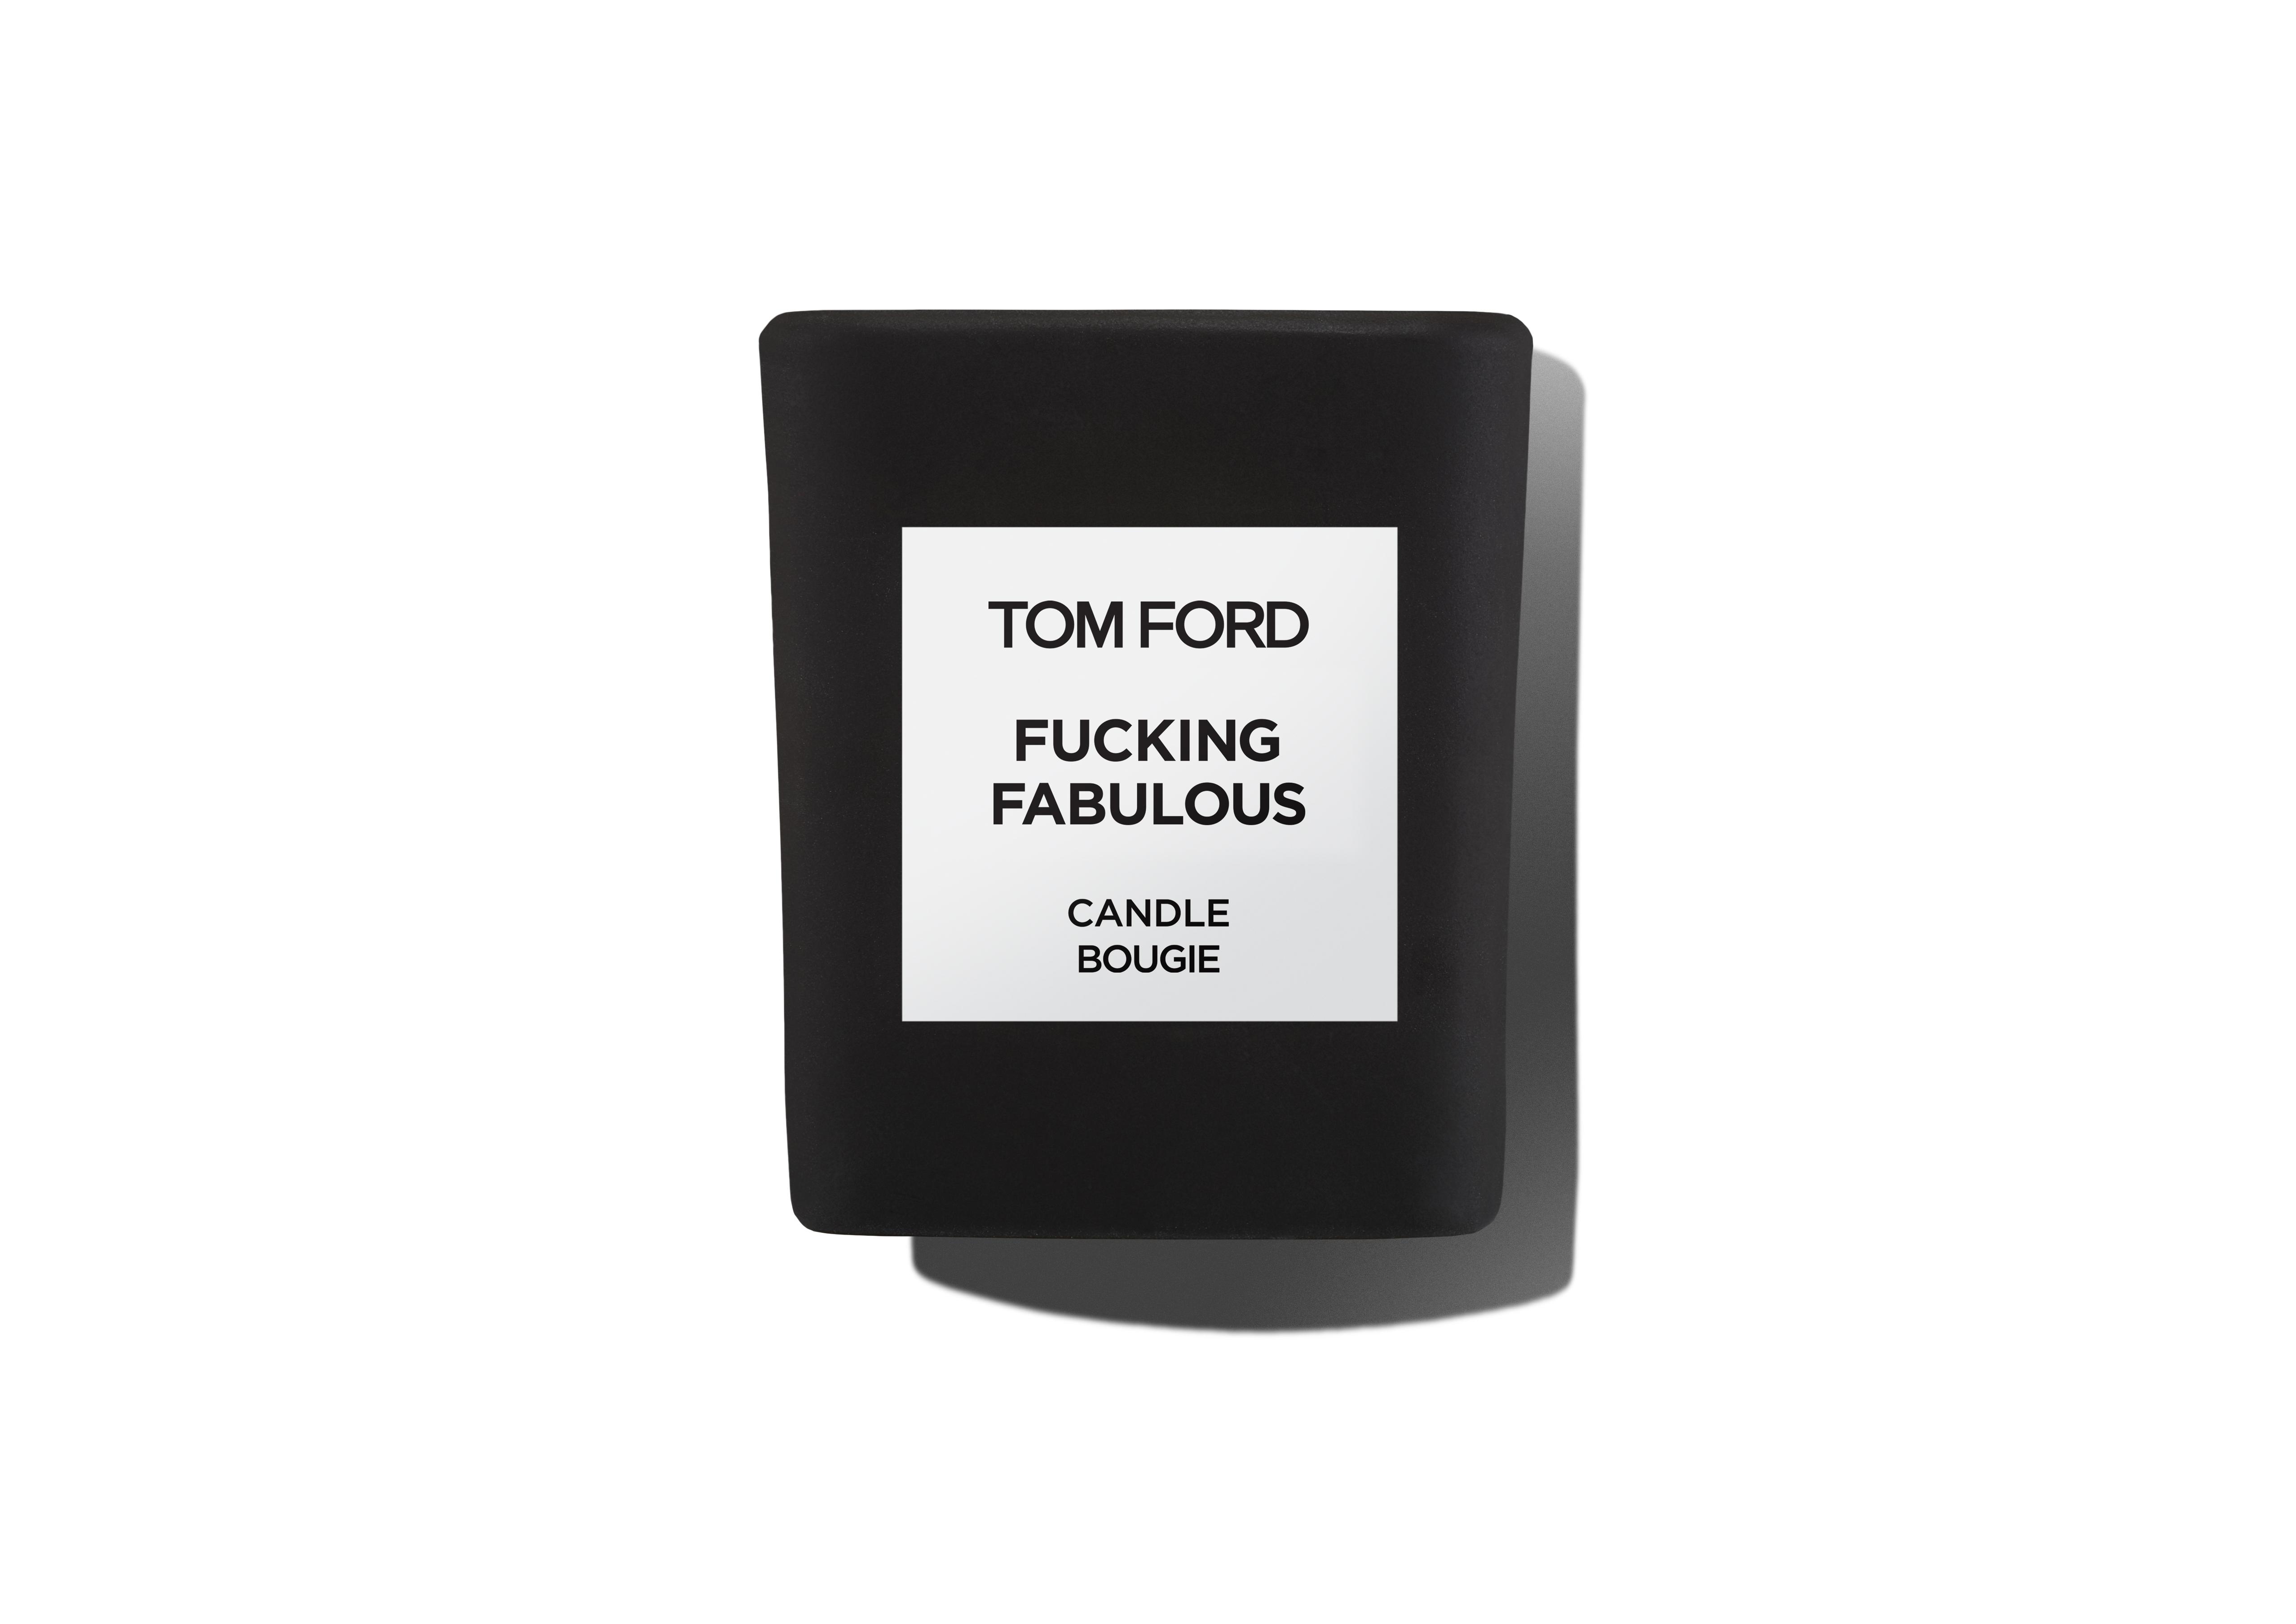 Tom Ford FUCKING FABULOUS CANDLE | TomFord.com